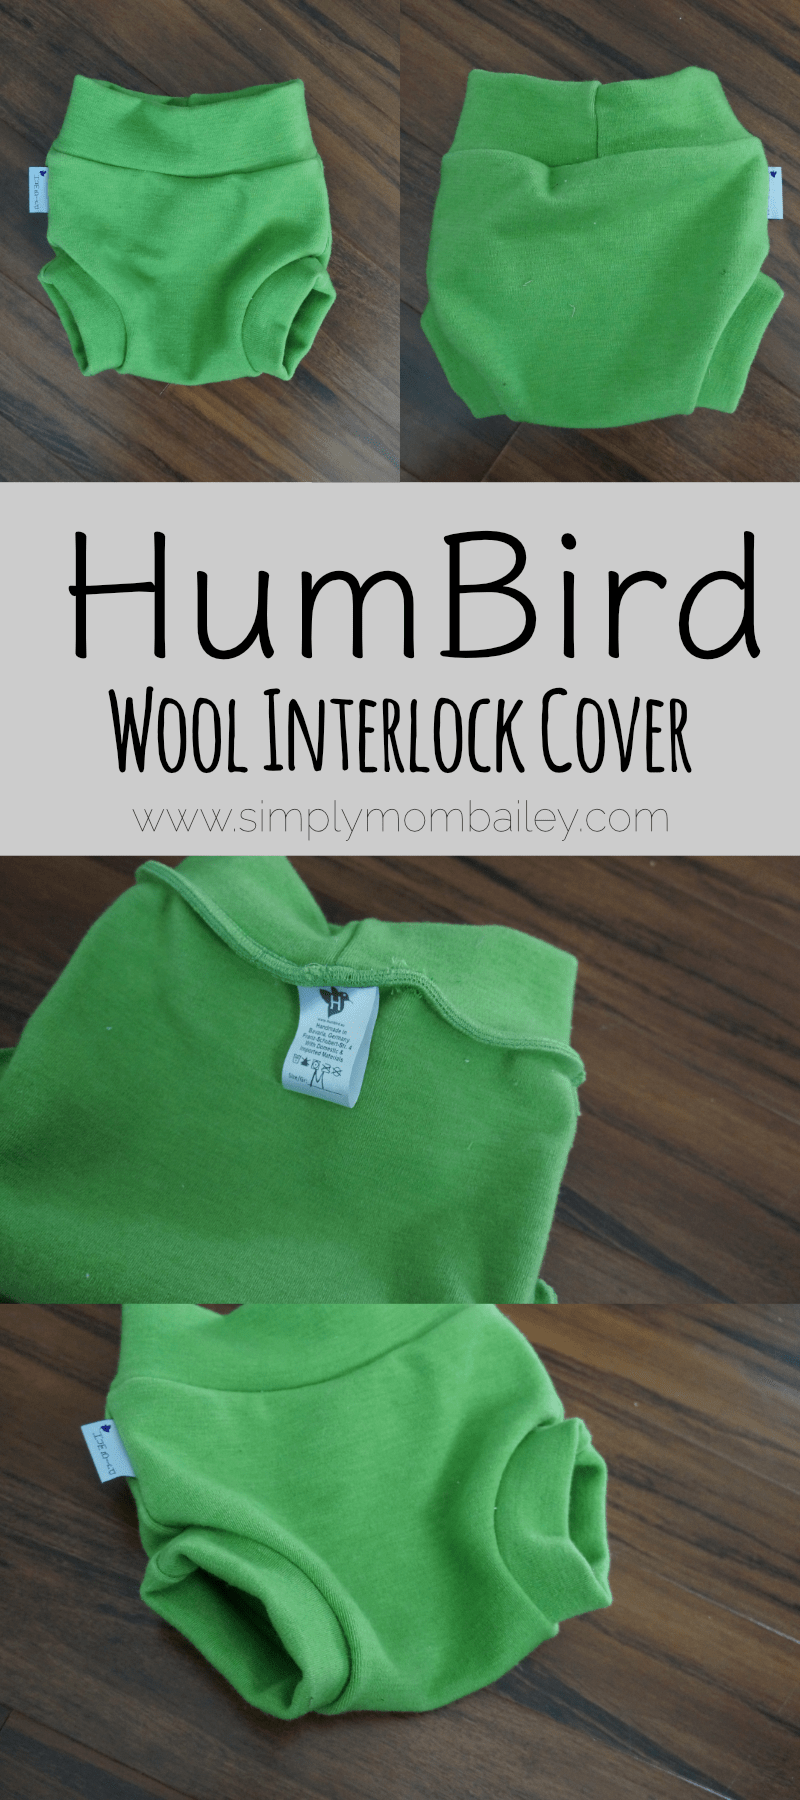 HumBird Wool Interlock Cover - Wool Cover - Wool - Cloth Diaper - Made in Germany - WAHM - Babies - Night Time Cloth Diaper